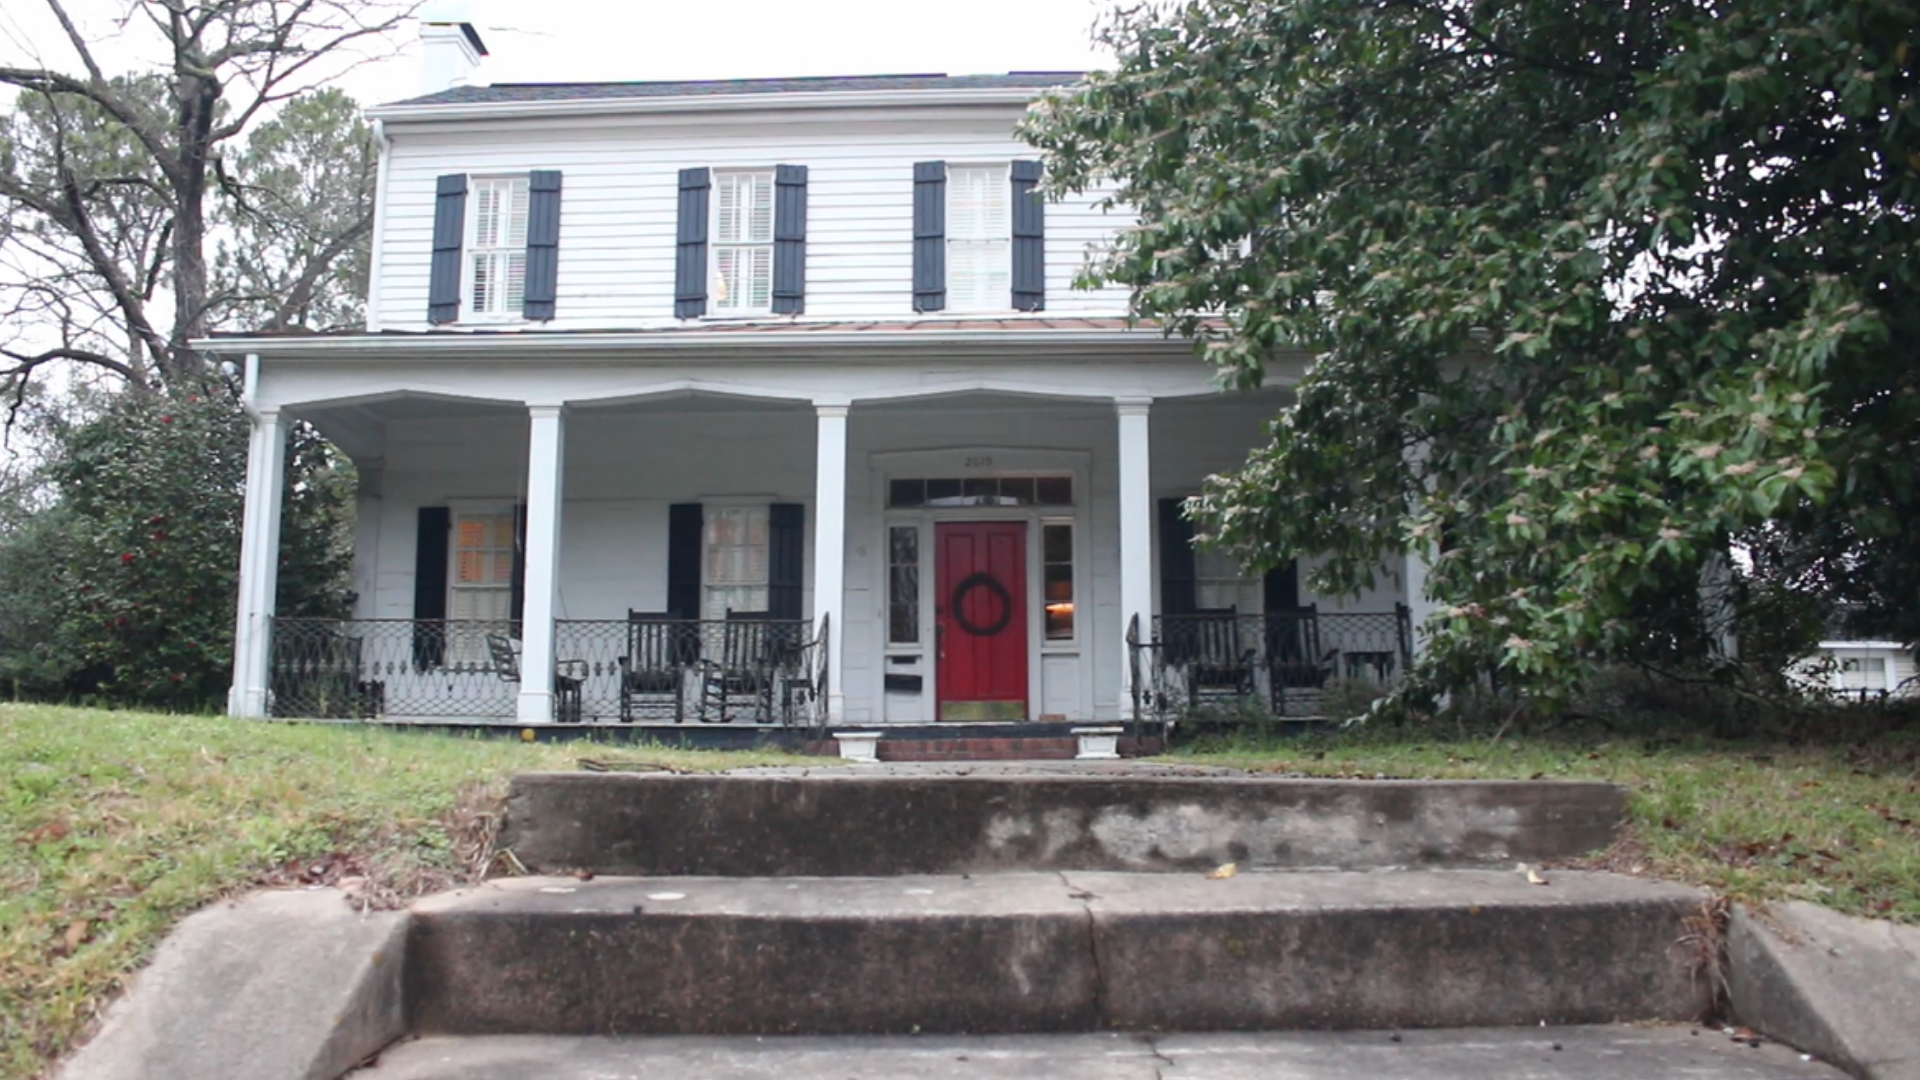 Macon is home to a lot of historic architecture, so we were just curious, what is the oldest building in Macon?